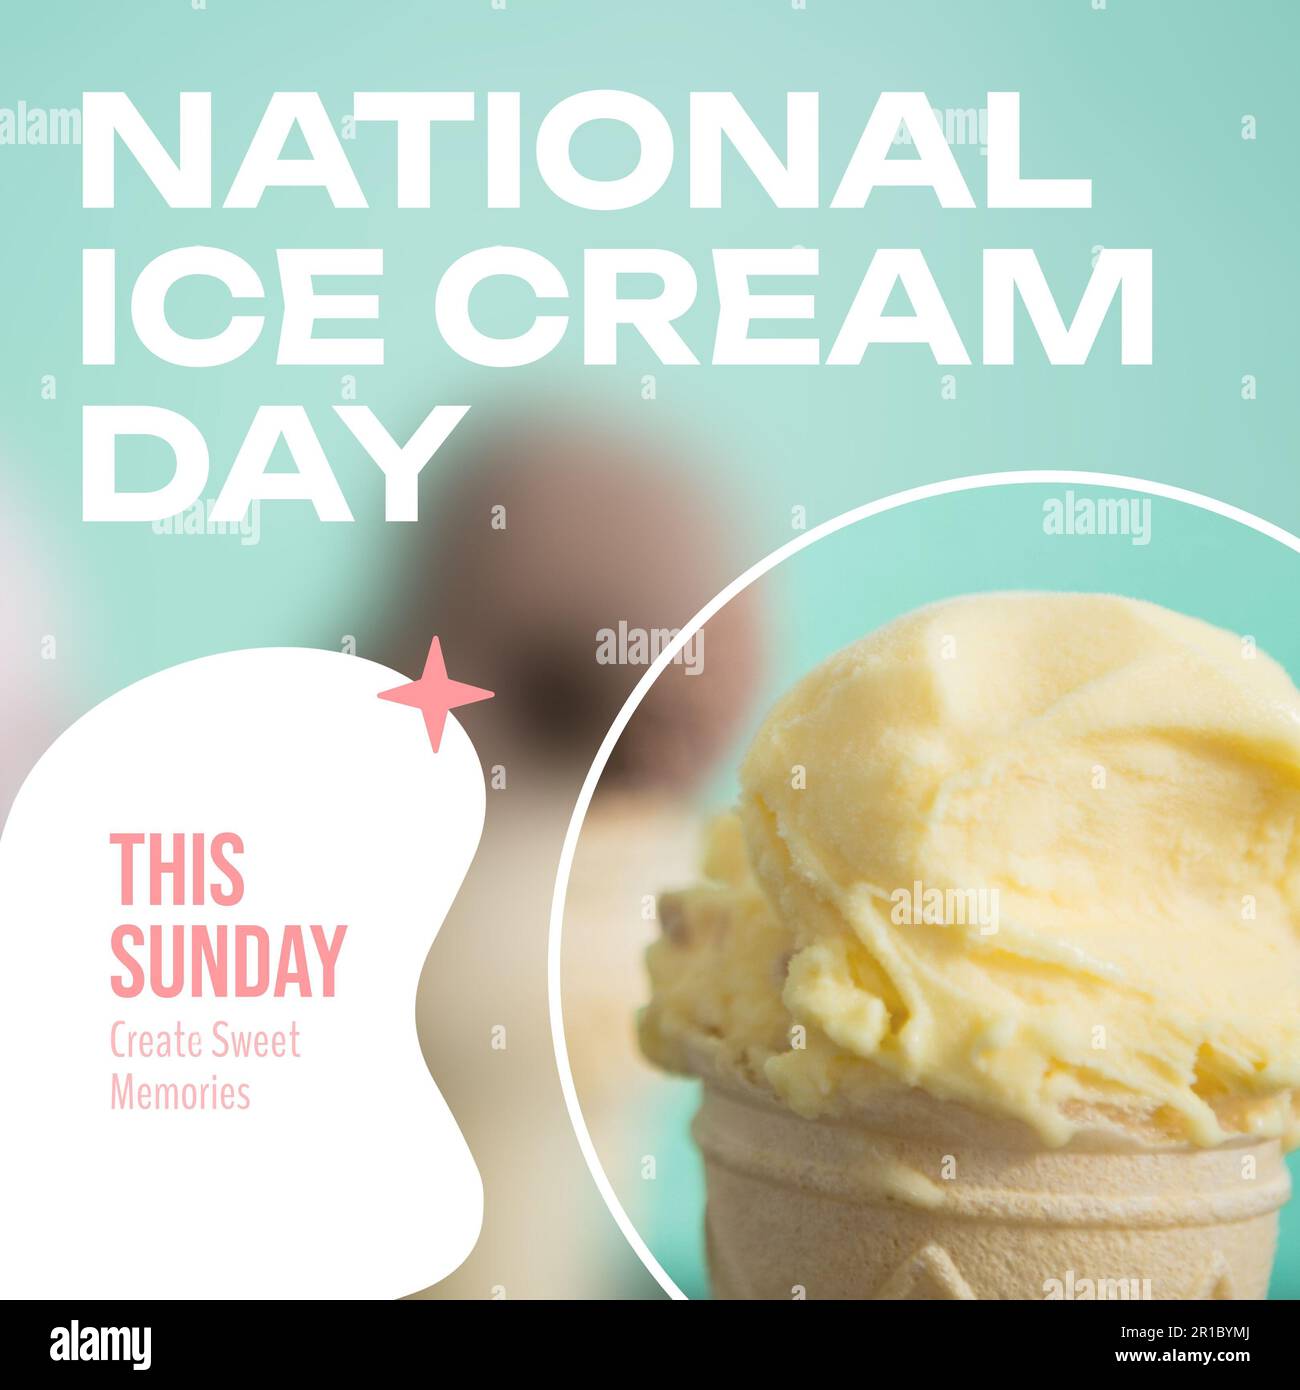 Composition of national ice cream day text over ice cream on green background Stock Photo